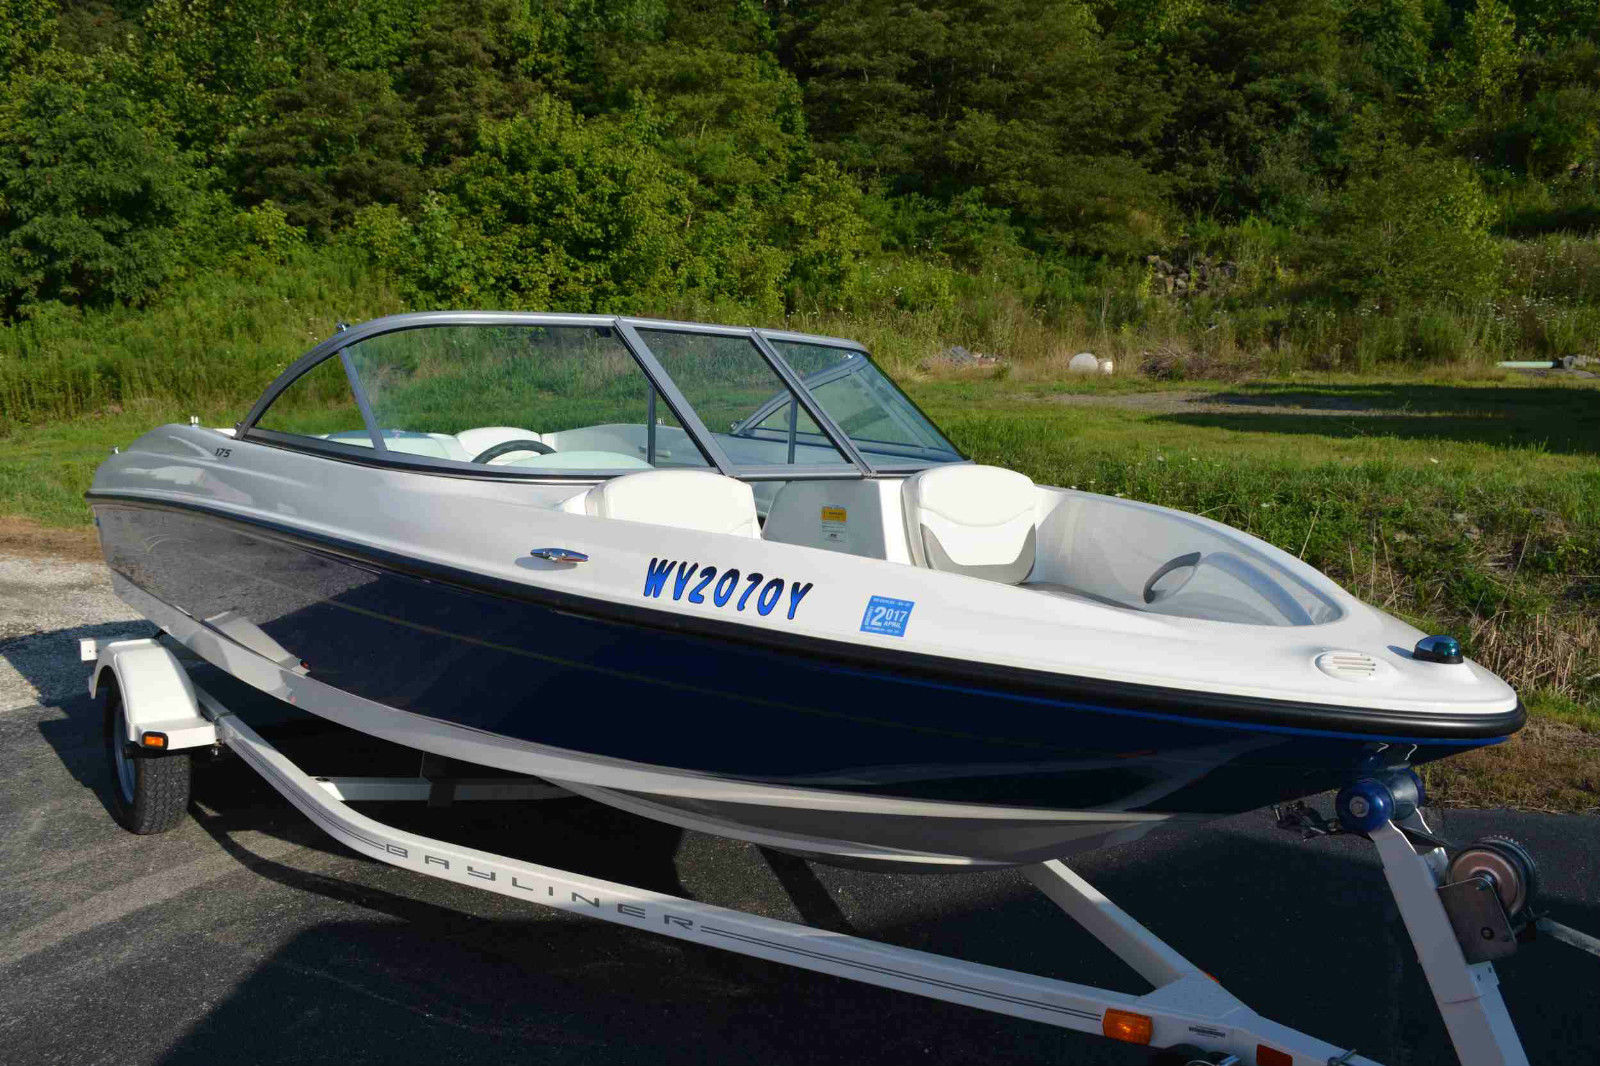  Boats Interactive Pricing Build A Boat 2016 | 2016 Car Release Date